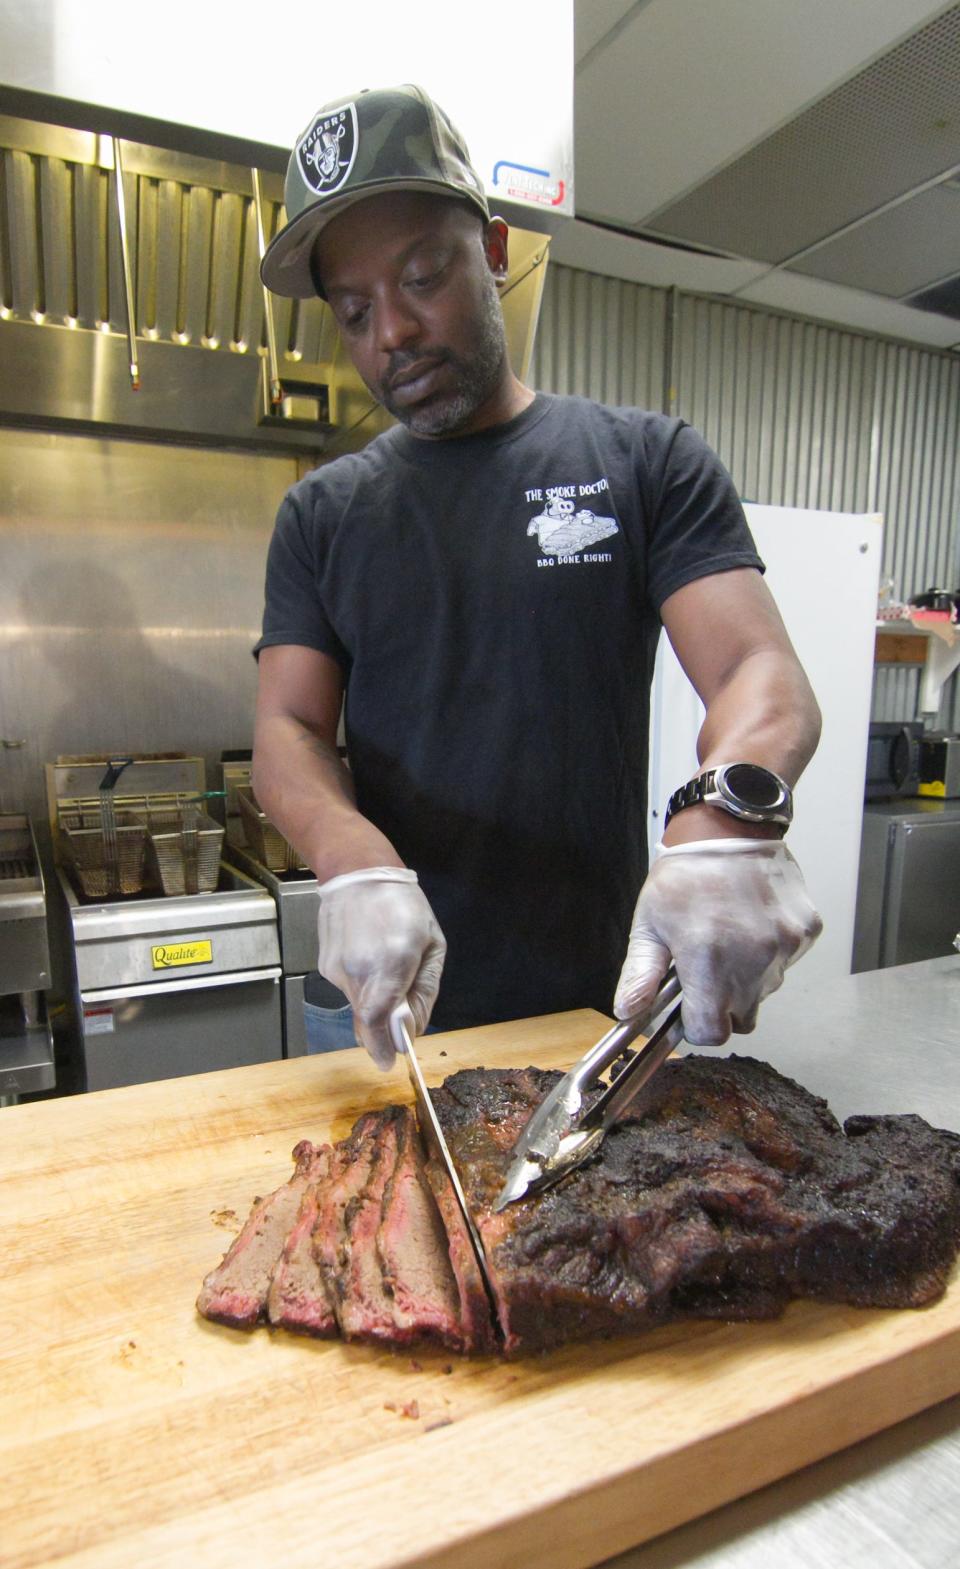 Cornell Clark, The Smoke Doctor, carves brisket of beef at his restaurant by the same name in Hamburg Township Wednesday, March 10, 2021.